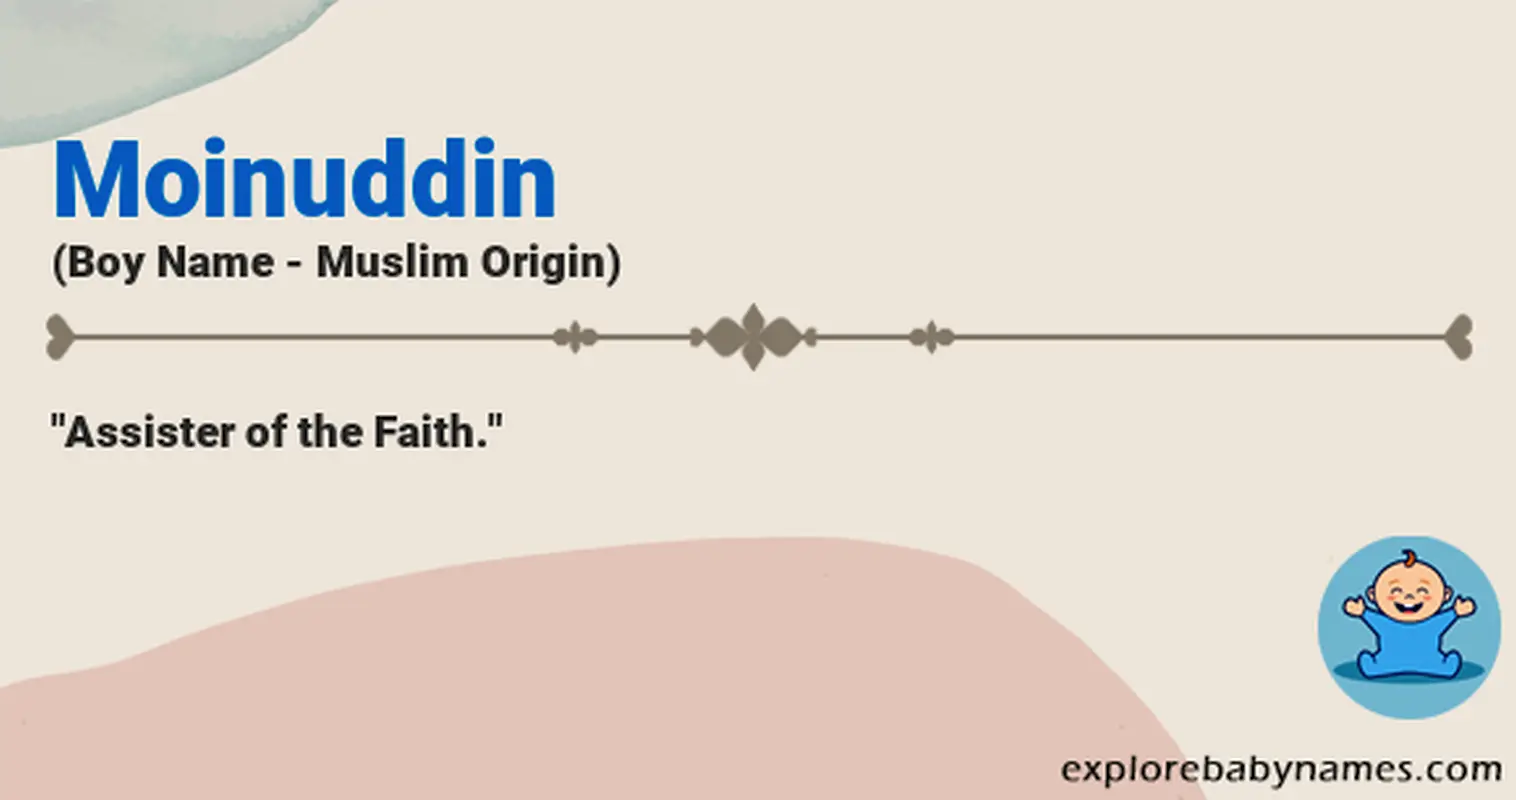 Meaning of Moinuddin